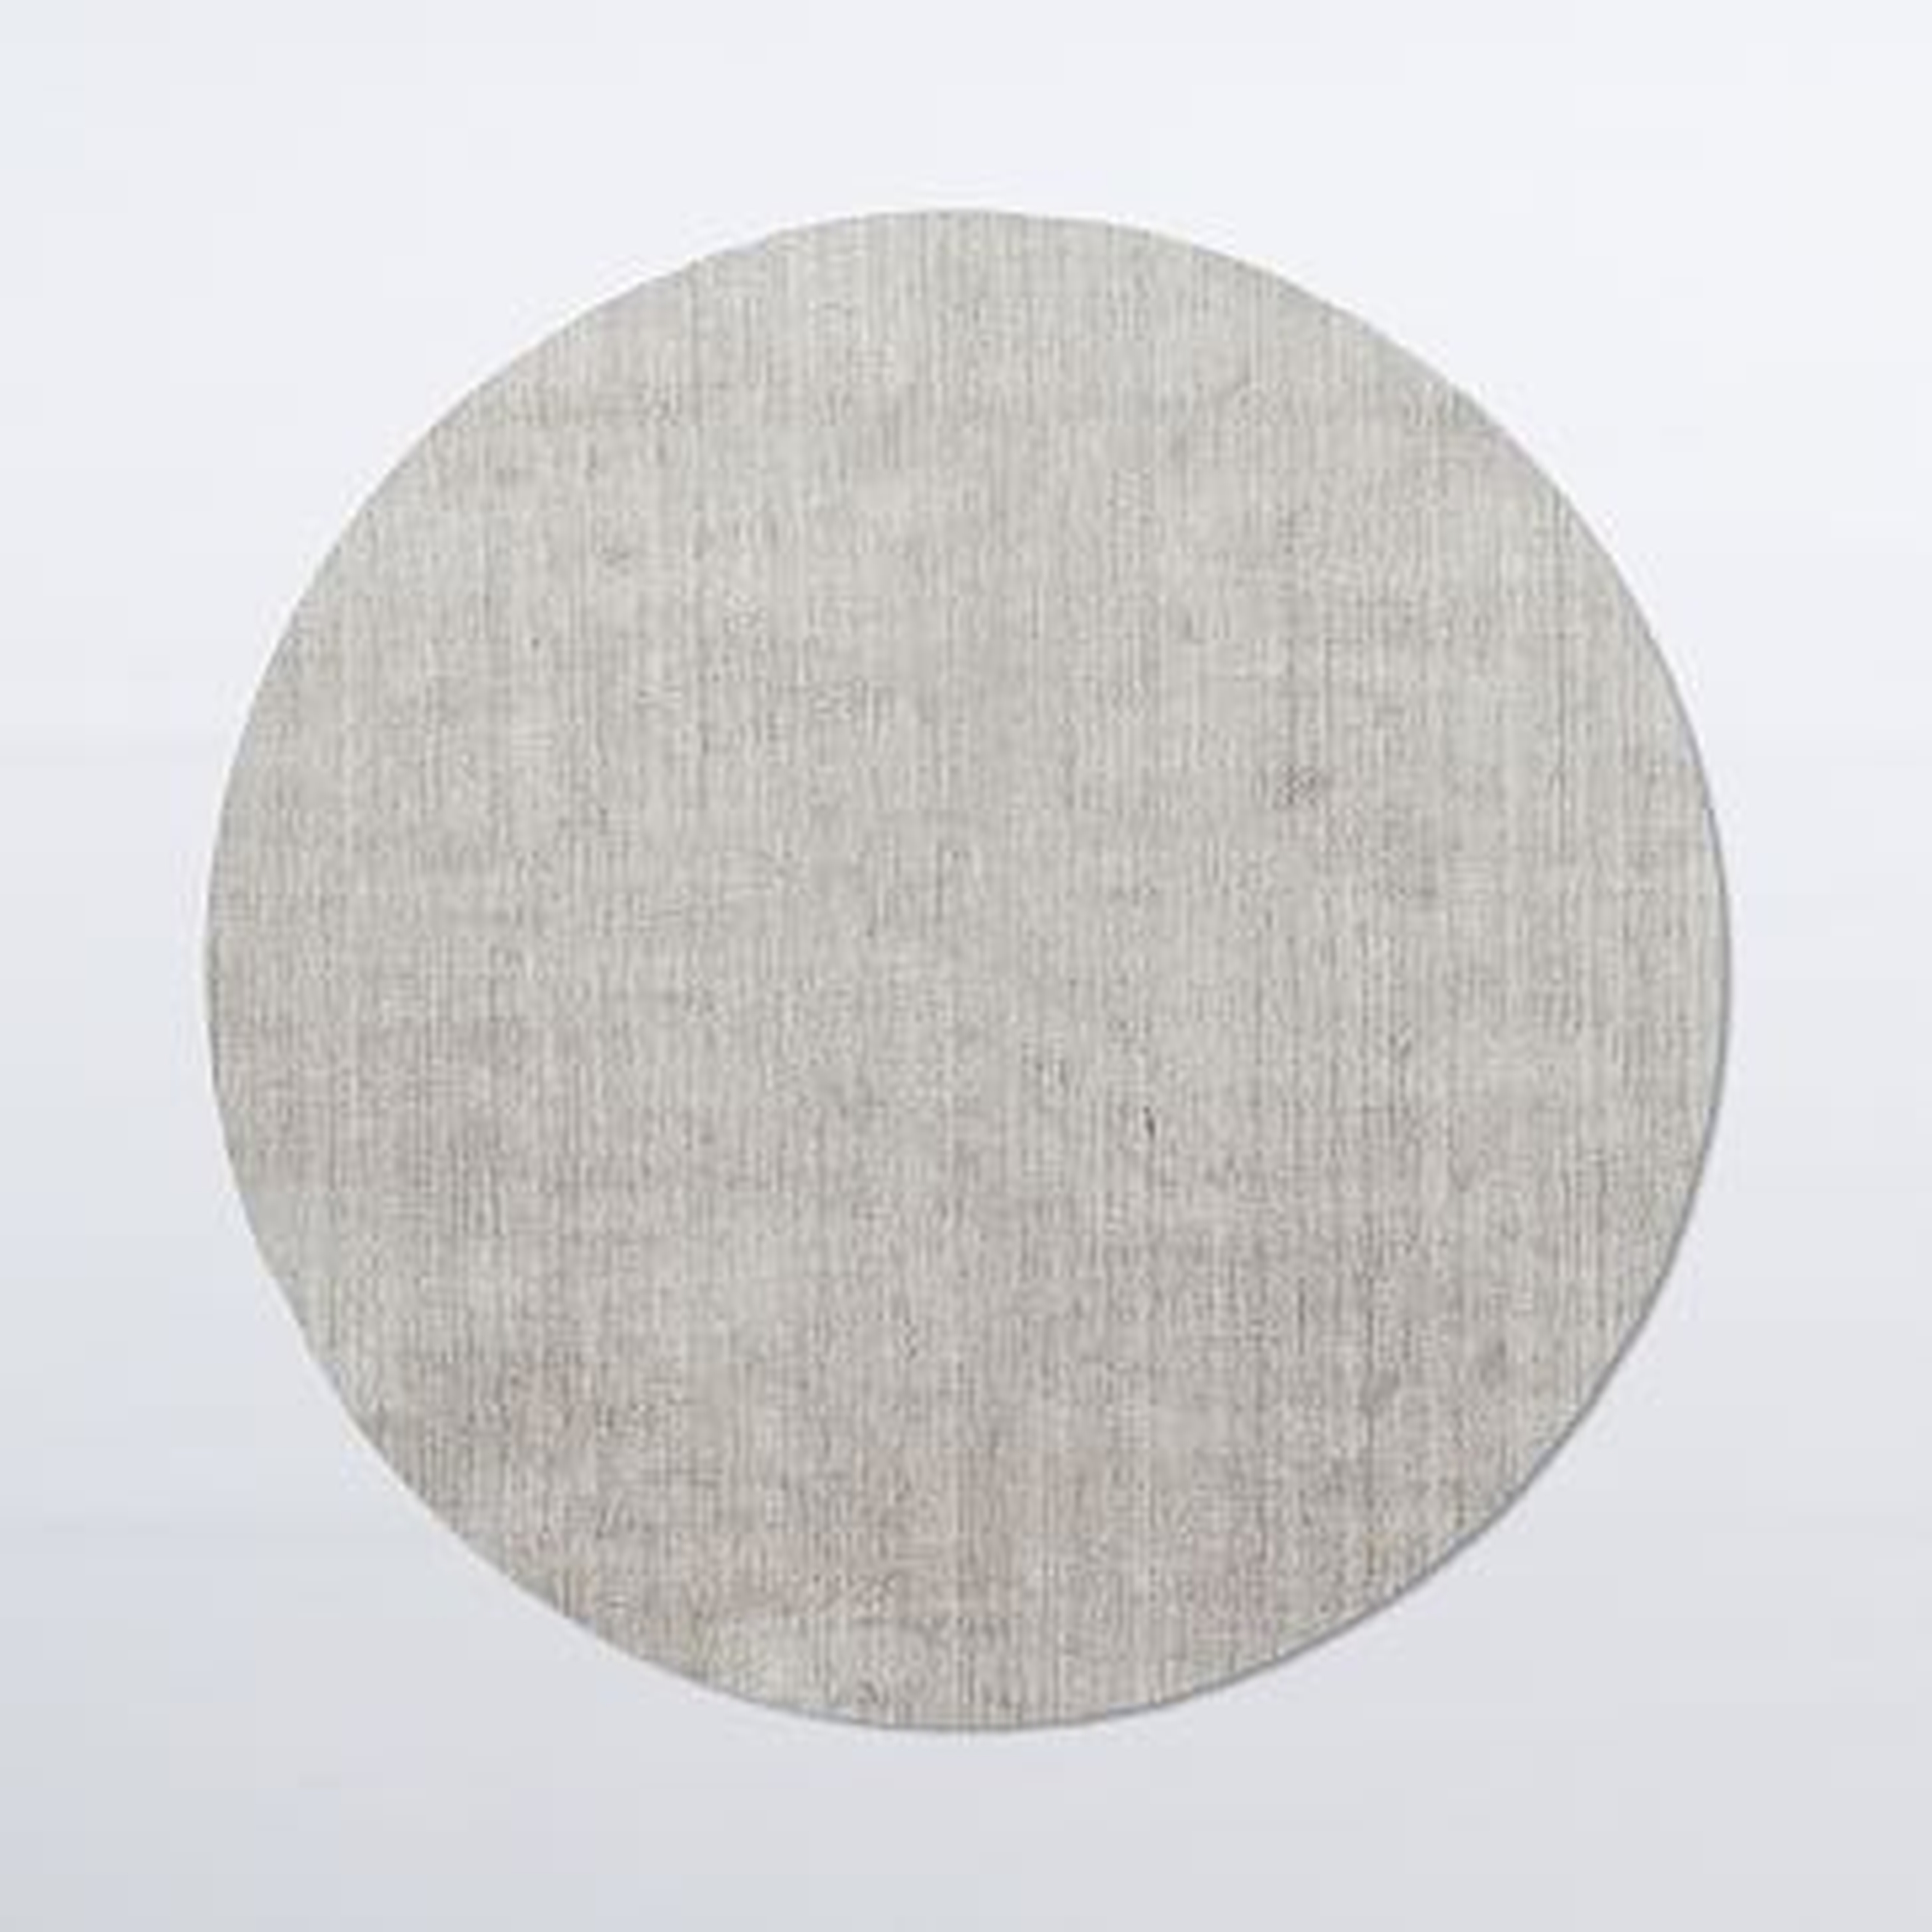 Hand Loomed Shine Rug, 6x6 Round, Silver - West Elm